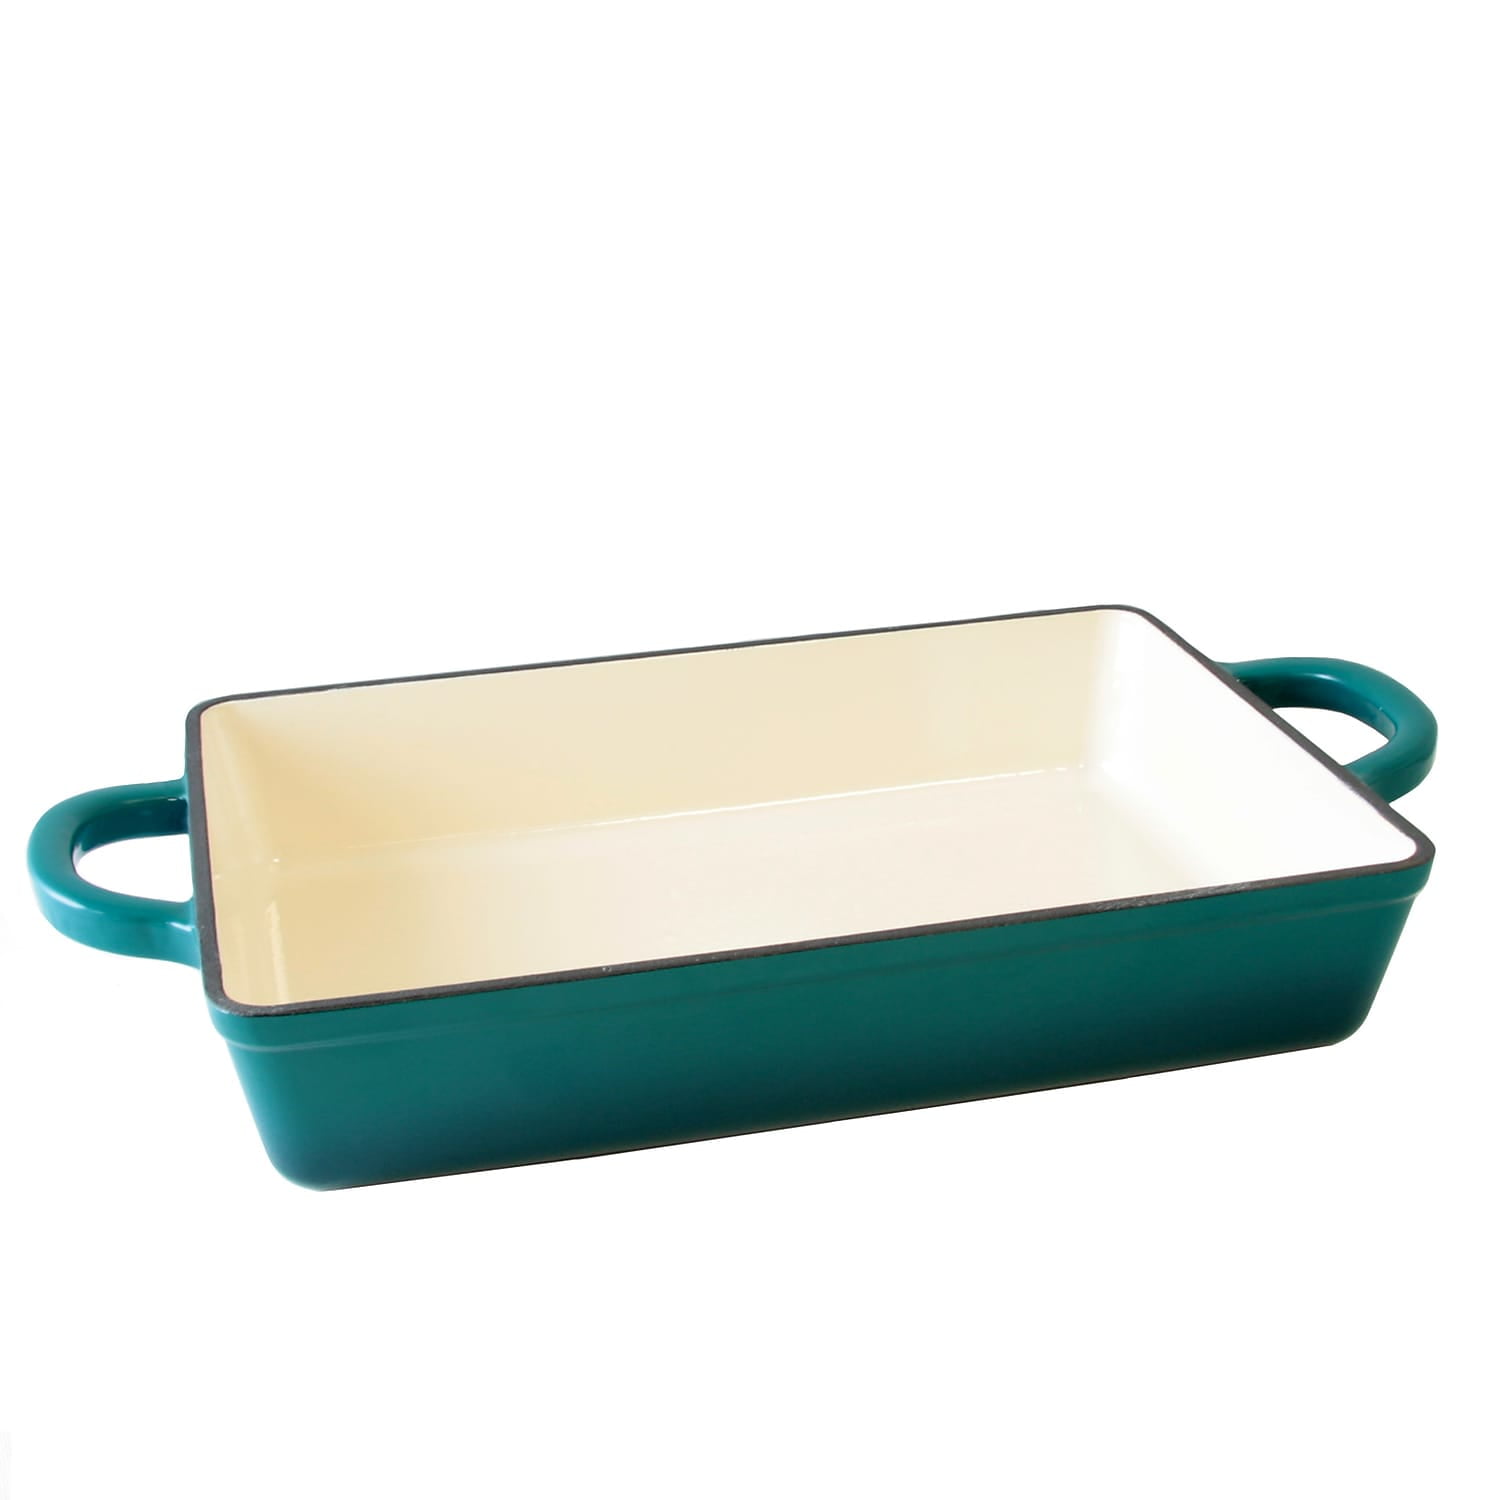 Crock-Pot Artisan 10 in. Cast Iron Nonstick Skillet in Teal Ombre with  Helper Handle 985100789M - The Home Depot